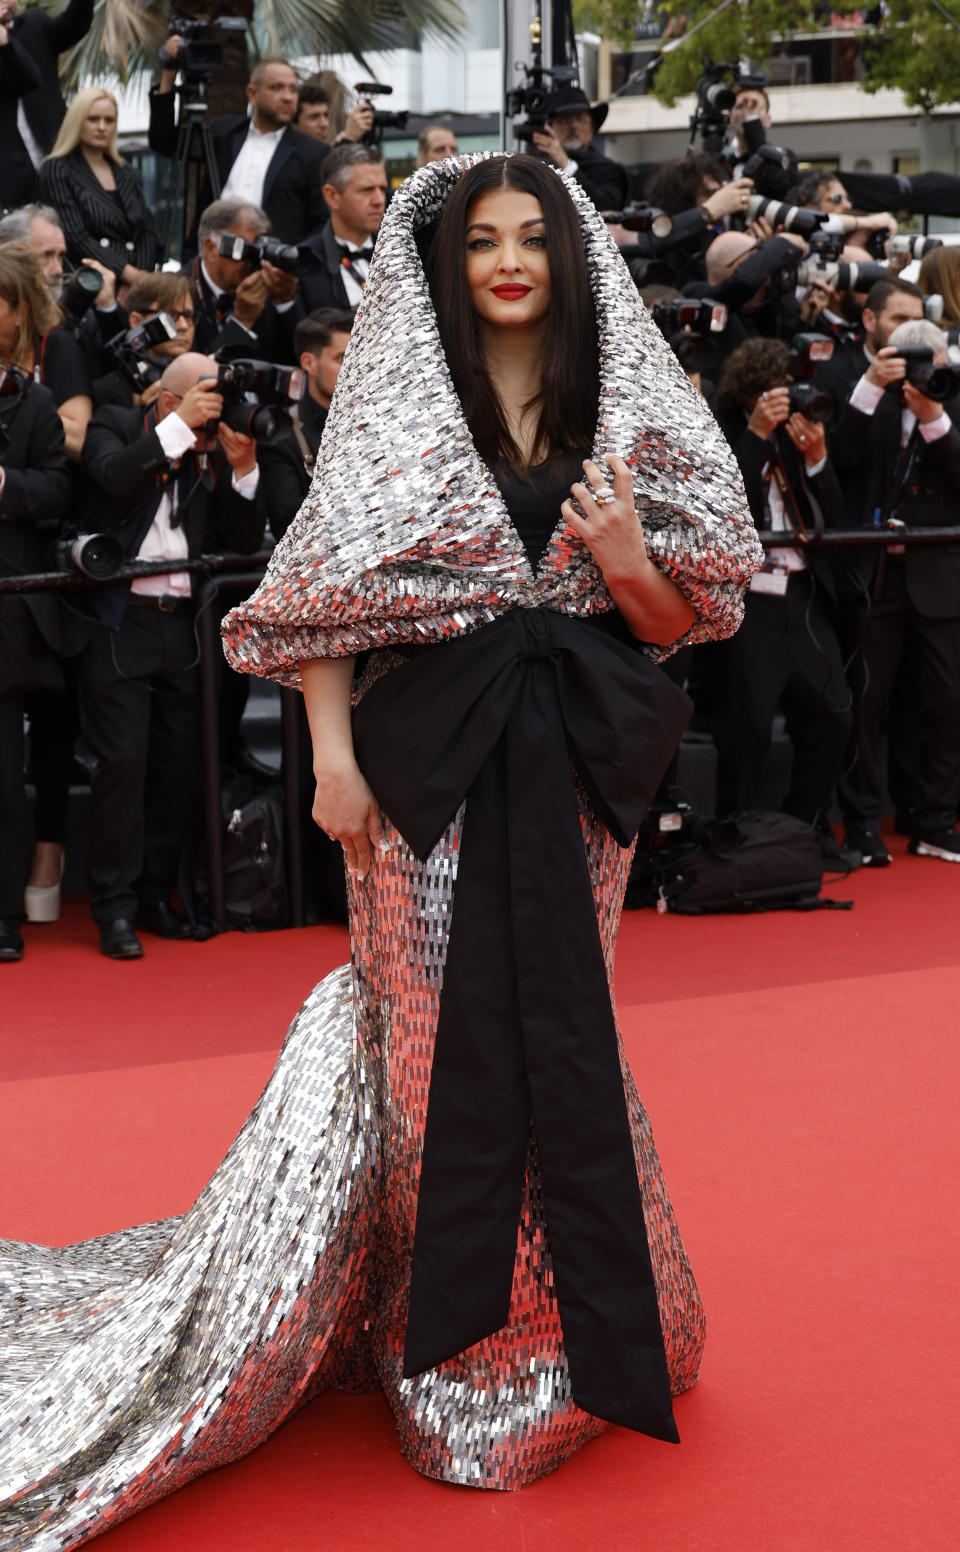 CANNES, FRANCE - MAY 18: Aishwarya Rai attends the 